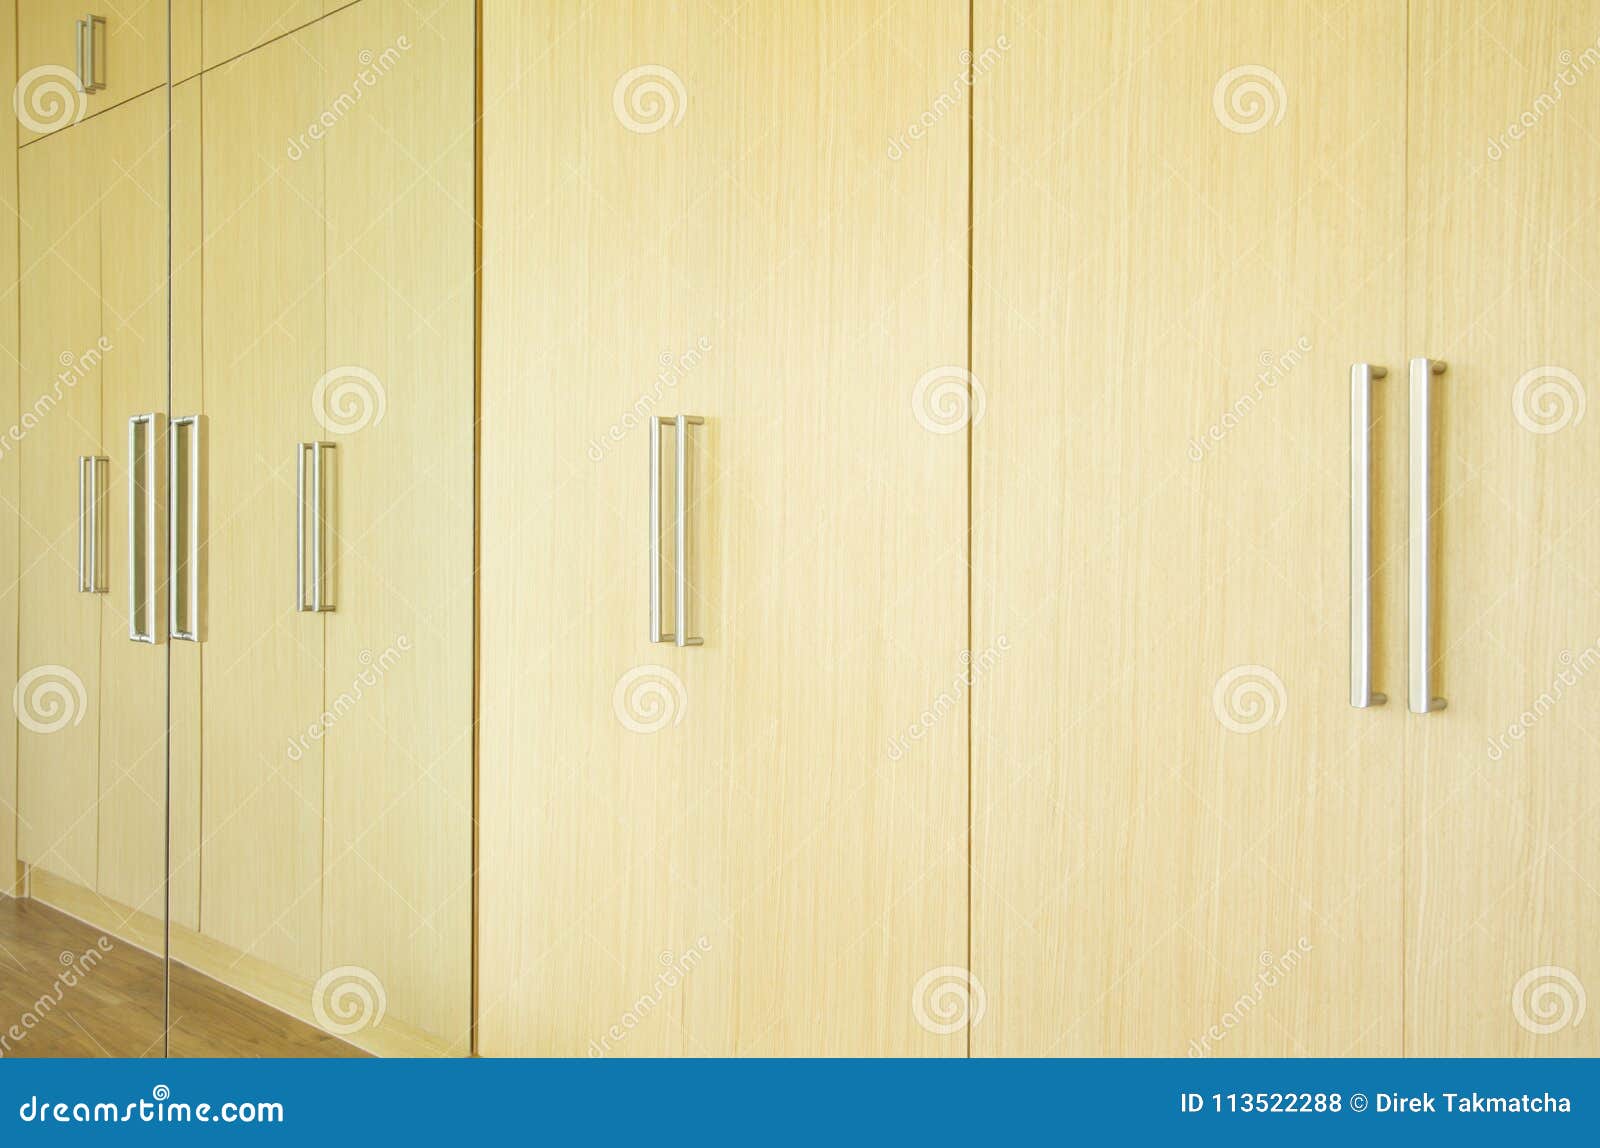 Modern Style Of Wooden Wardrobe Stock Photo Image Of Table